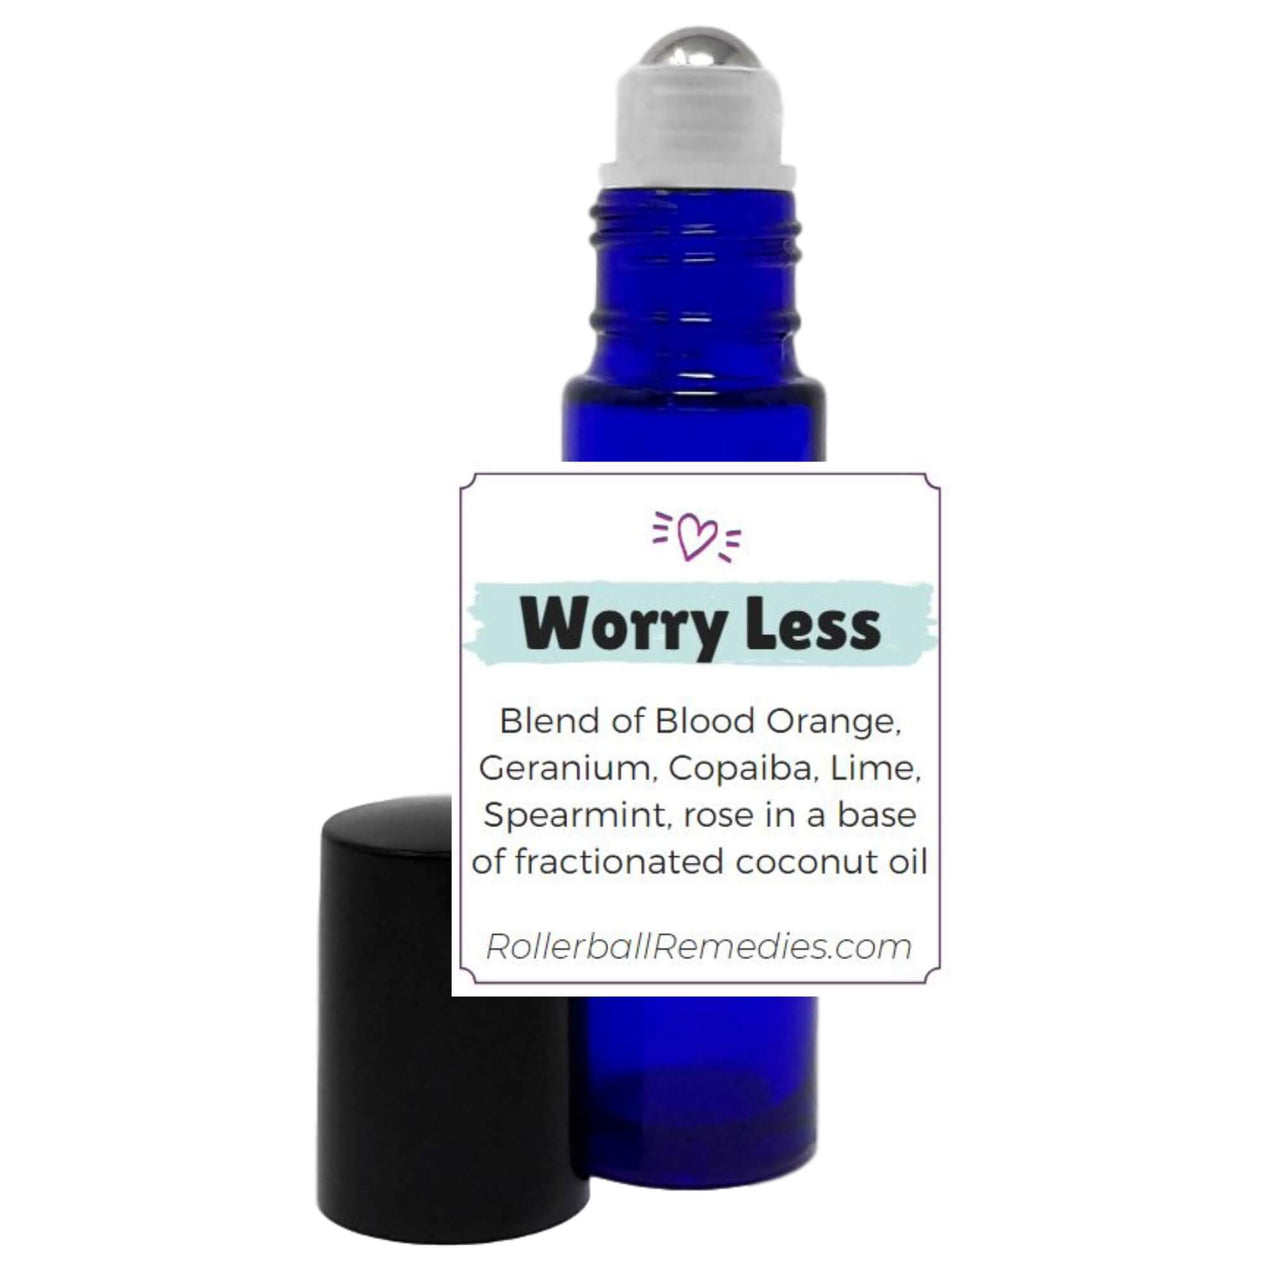 Worry Less Essential Oil Blend - 10 ml Roller Bottle with Blood Orange, Geranium, Copaiba, Lime, Spearmint, and Rose